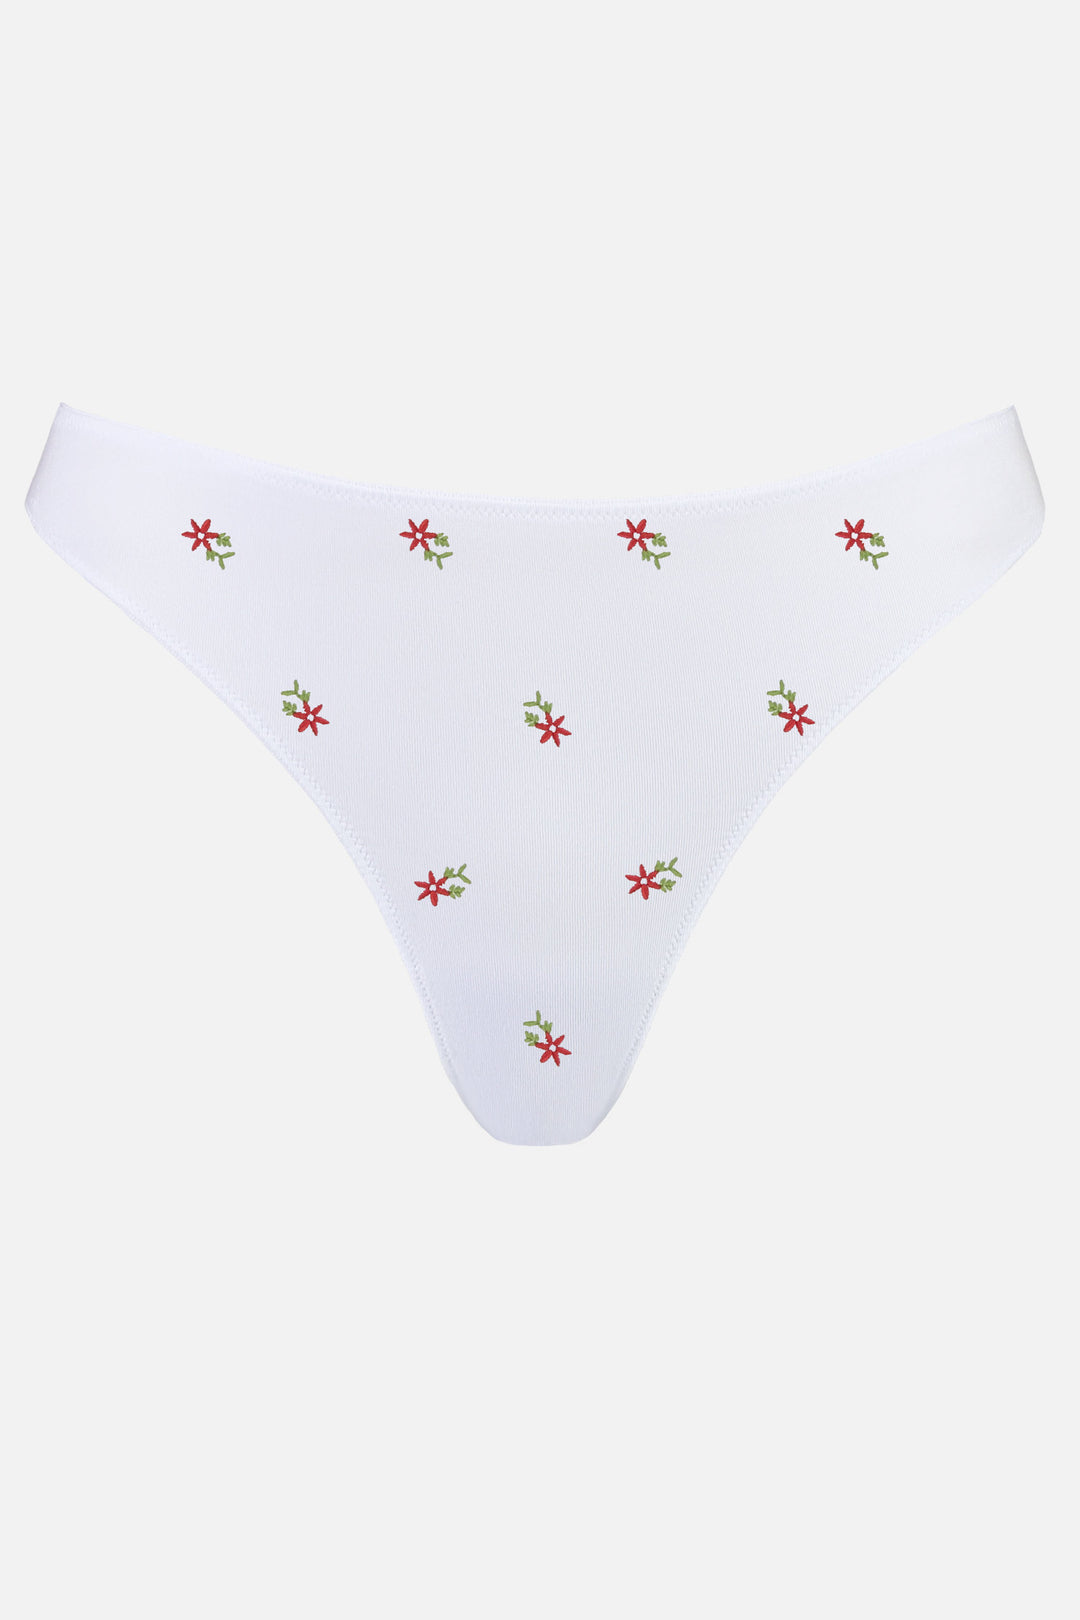 Videris Lingerie bikini knicker in white TENCEL™ a comfortable mid-rise style cut to follow the natural curve of your hips